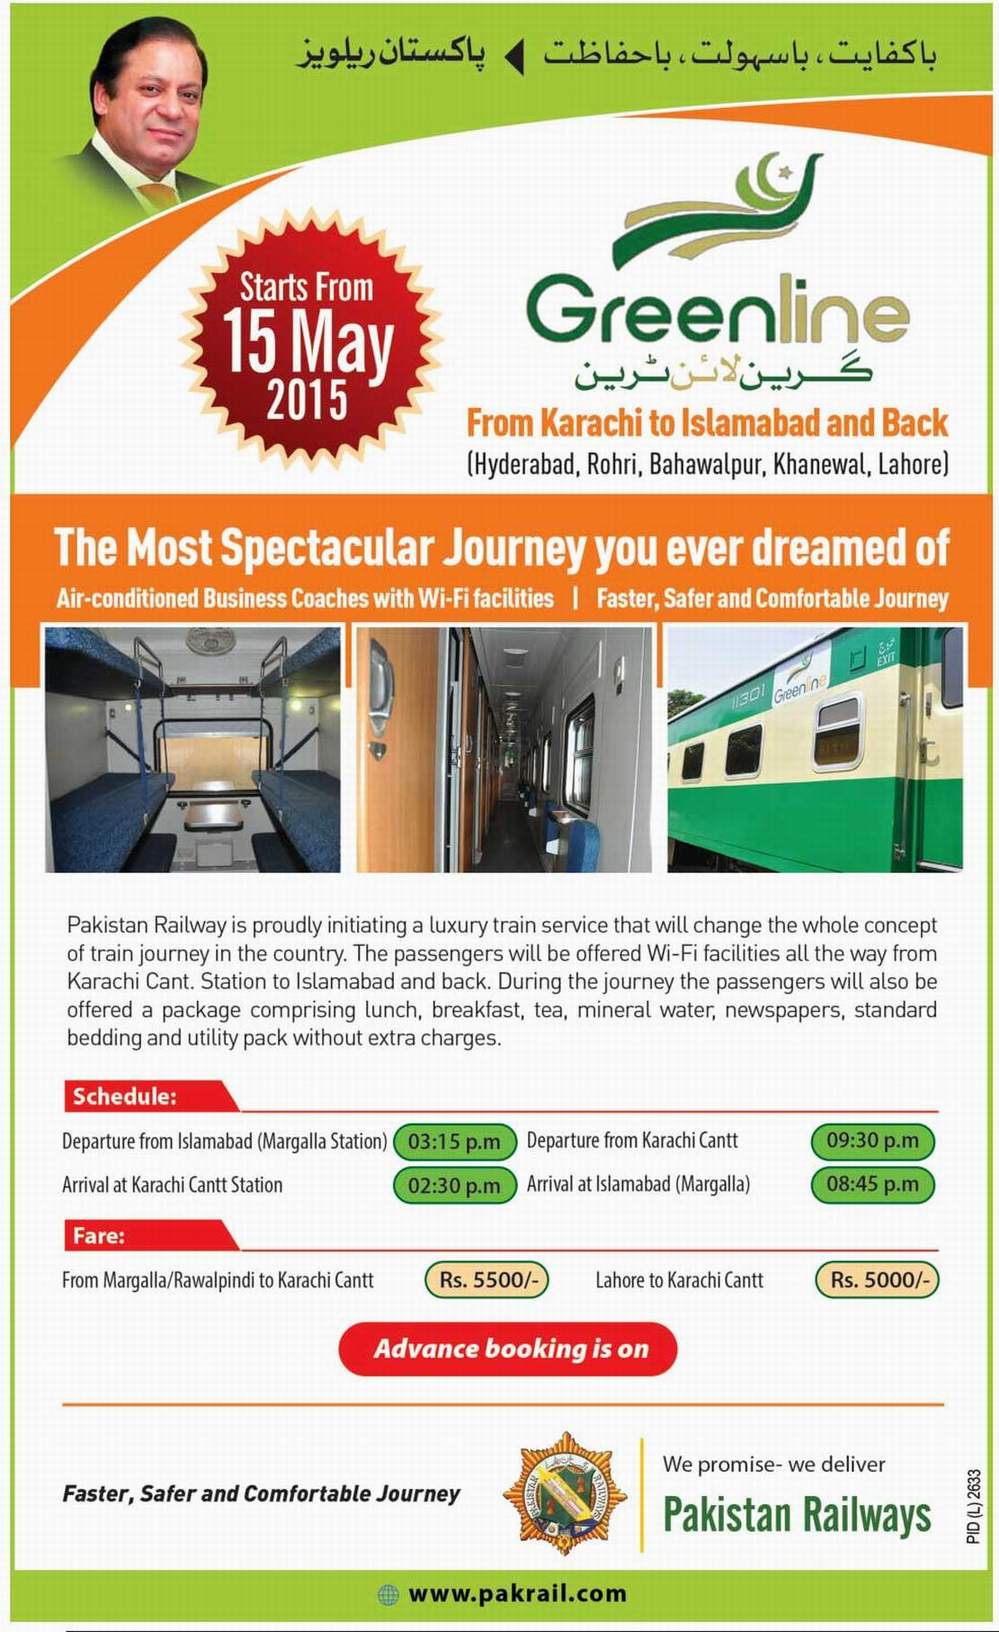 Treenline-train-from-karachi-to-islamabad-and-back-15-may-2015